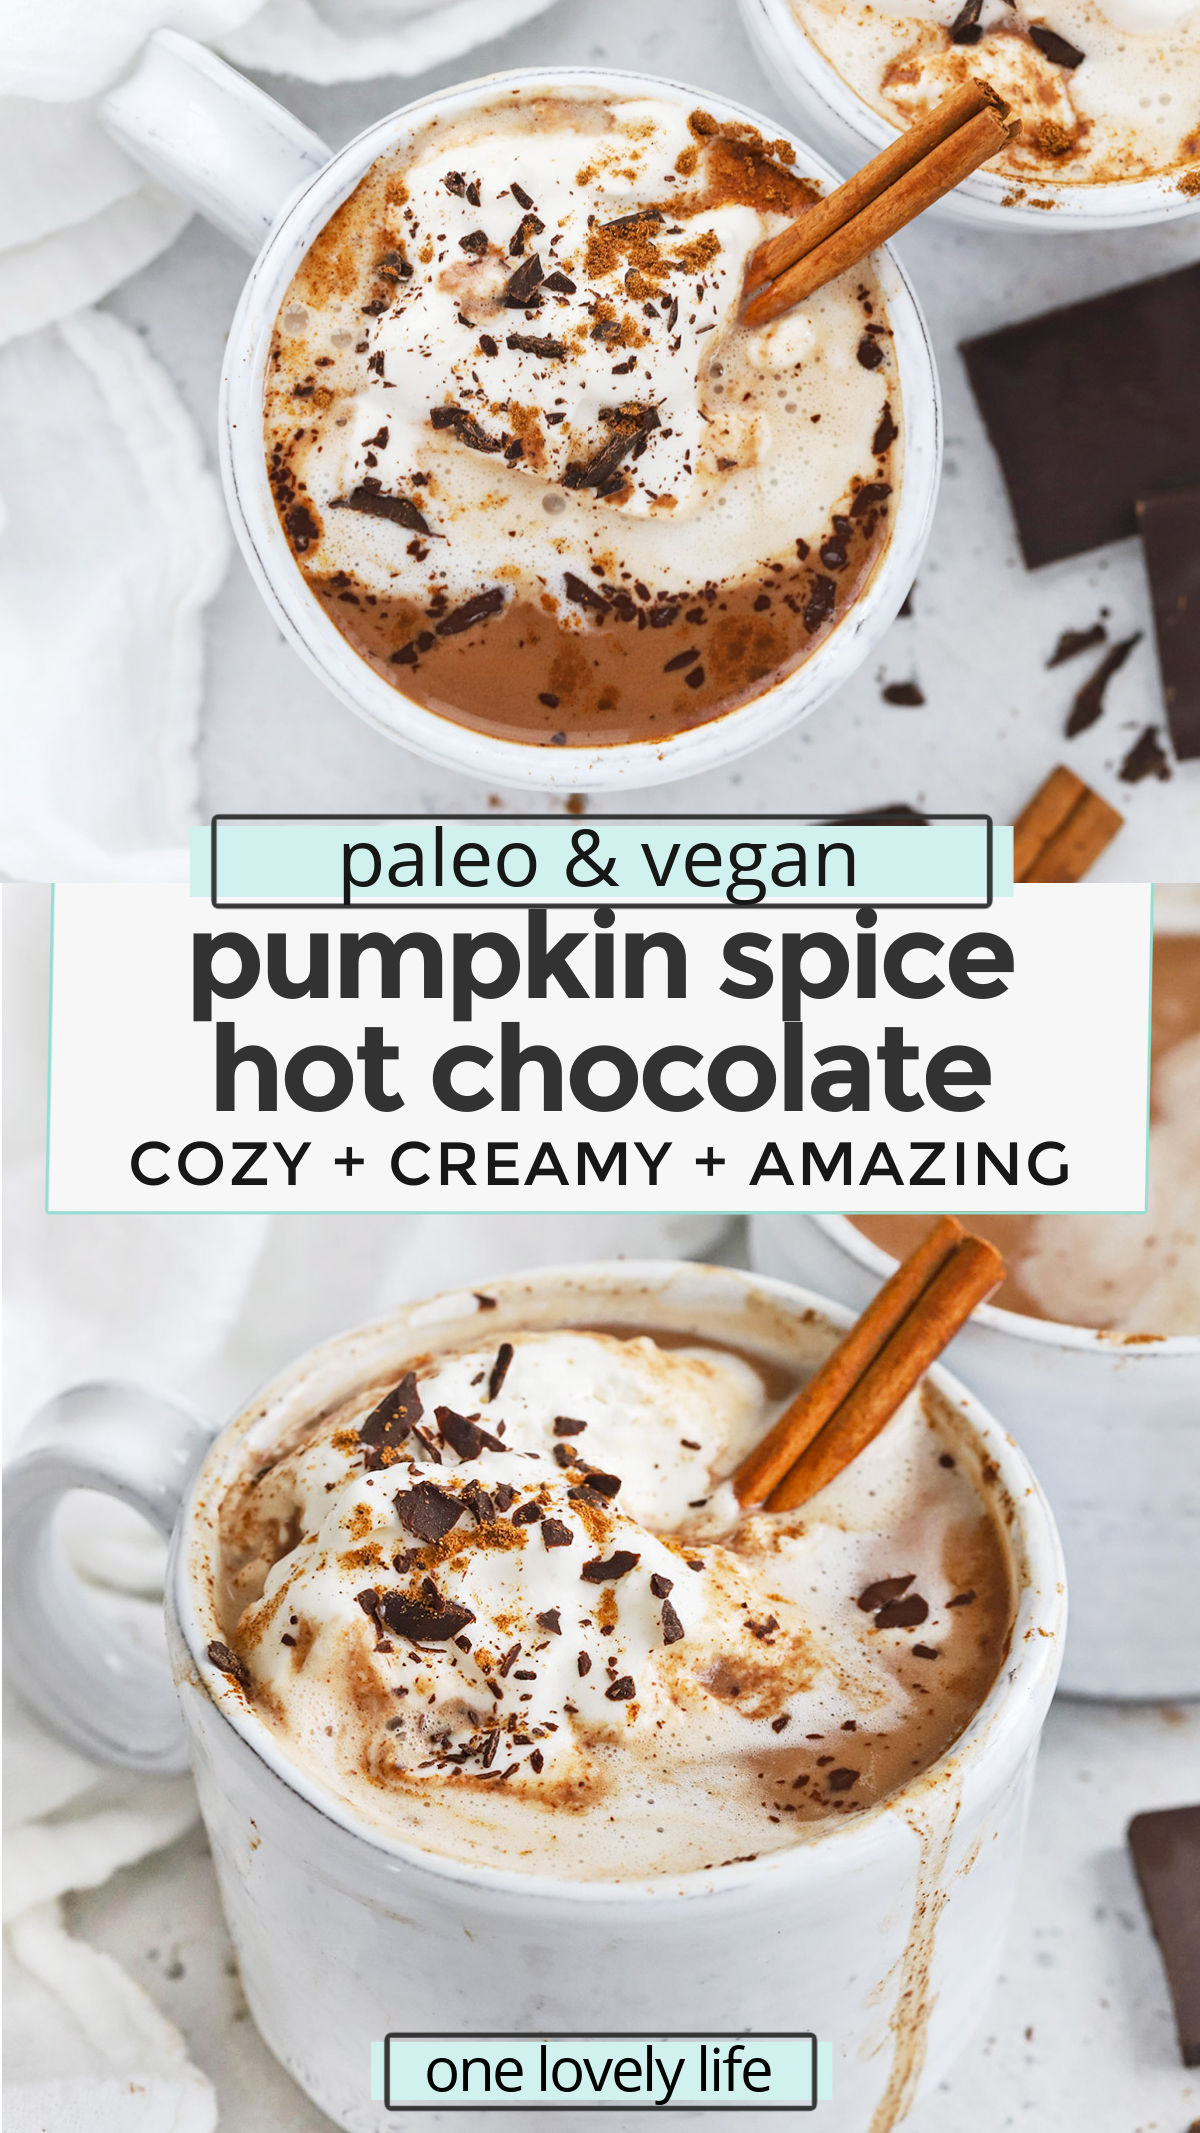 Vegan Pumpkin Spice Hot Chocolate - This dairy-free pumpkin spice hot chocolate is the perfect drink to cozy up with during cold weather. You'll love the rich, chocolatey flavor and warm kiss of spice. (Paleo-Friendly) // Pumpkin Spice Hot Cocoa Recipe // Vegan Hot Chocolate Recipe // Dairy Free Hot Chocolate Recipe // Pumpkin Hot Chocolate // Cinnamon Hot Chocolate #hotchocolate #hotcocoa #pumpkinspice #healthypumpkin #vegetarian #vegan #dairyfree #paleo